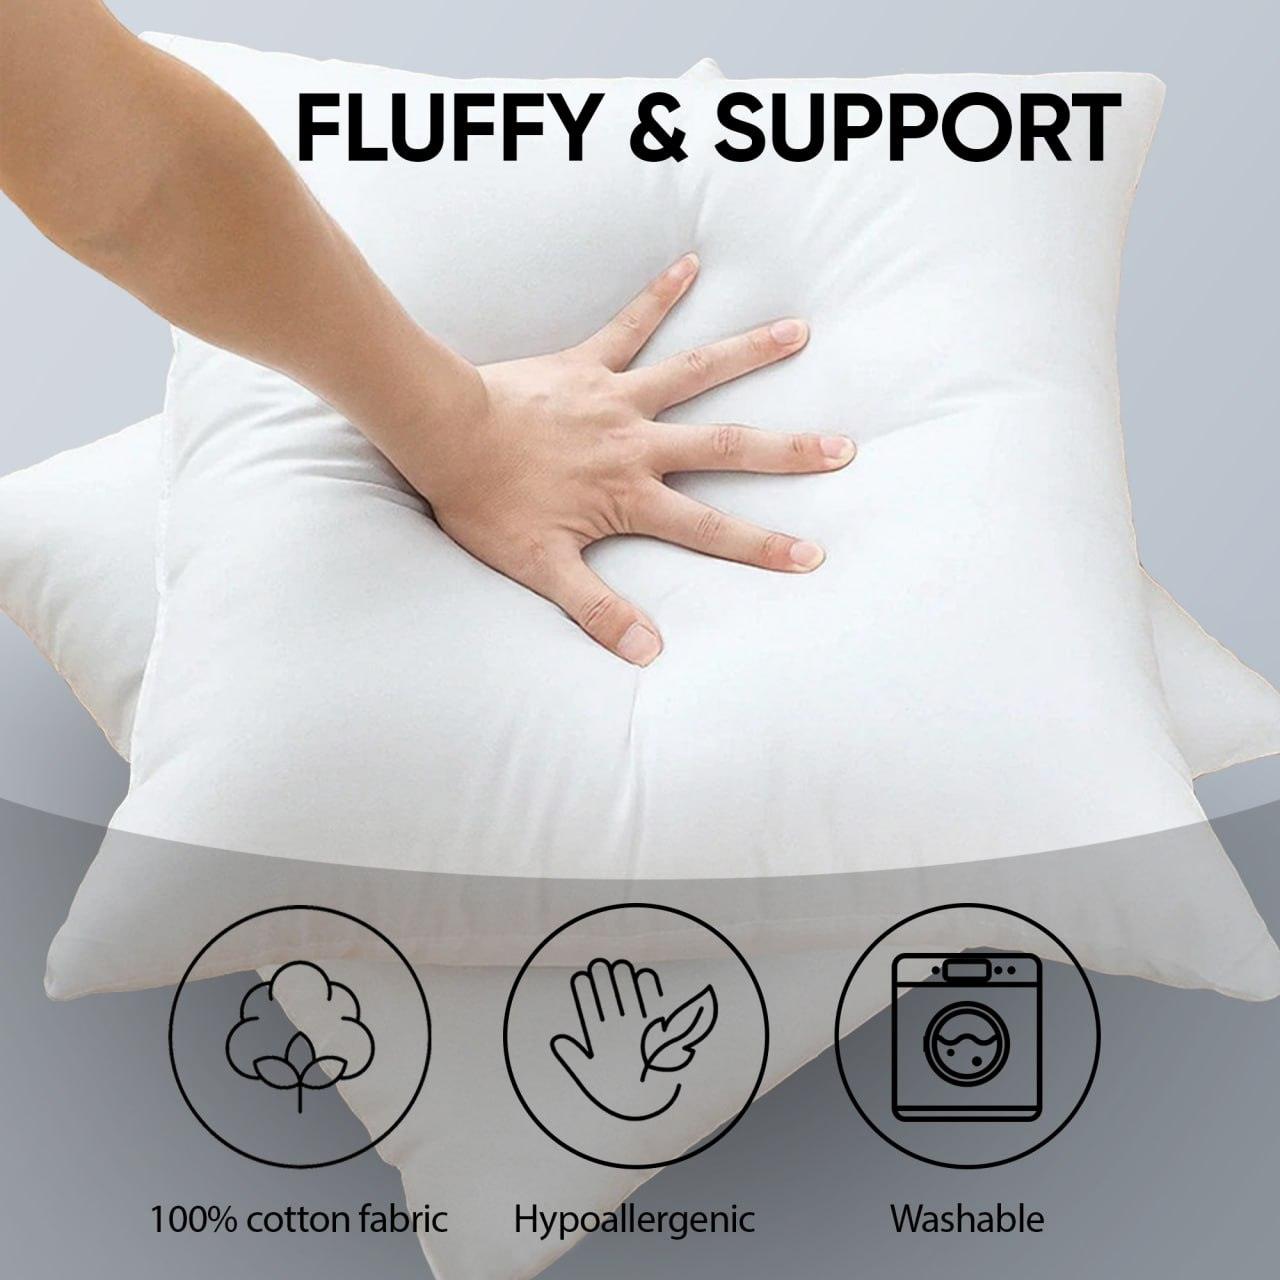 Feather Down Pillow Insert // Heavy Weight // Fluffy // Throw Pillow Insert  // Throw Pillow Cover Insert